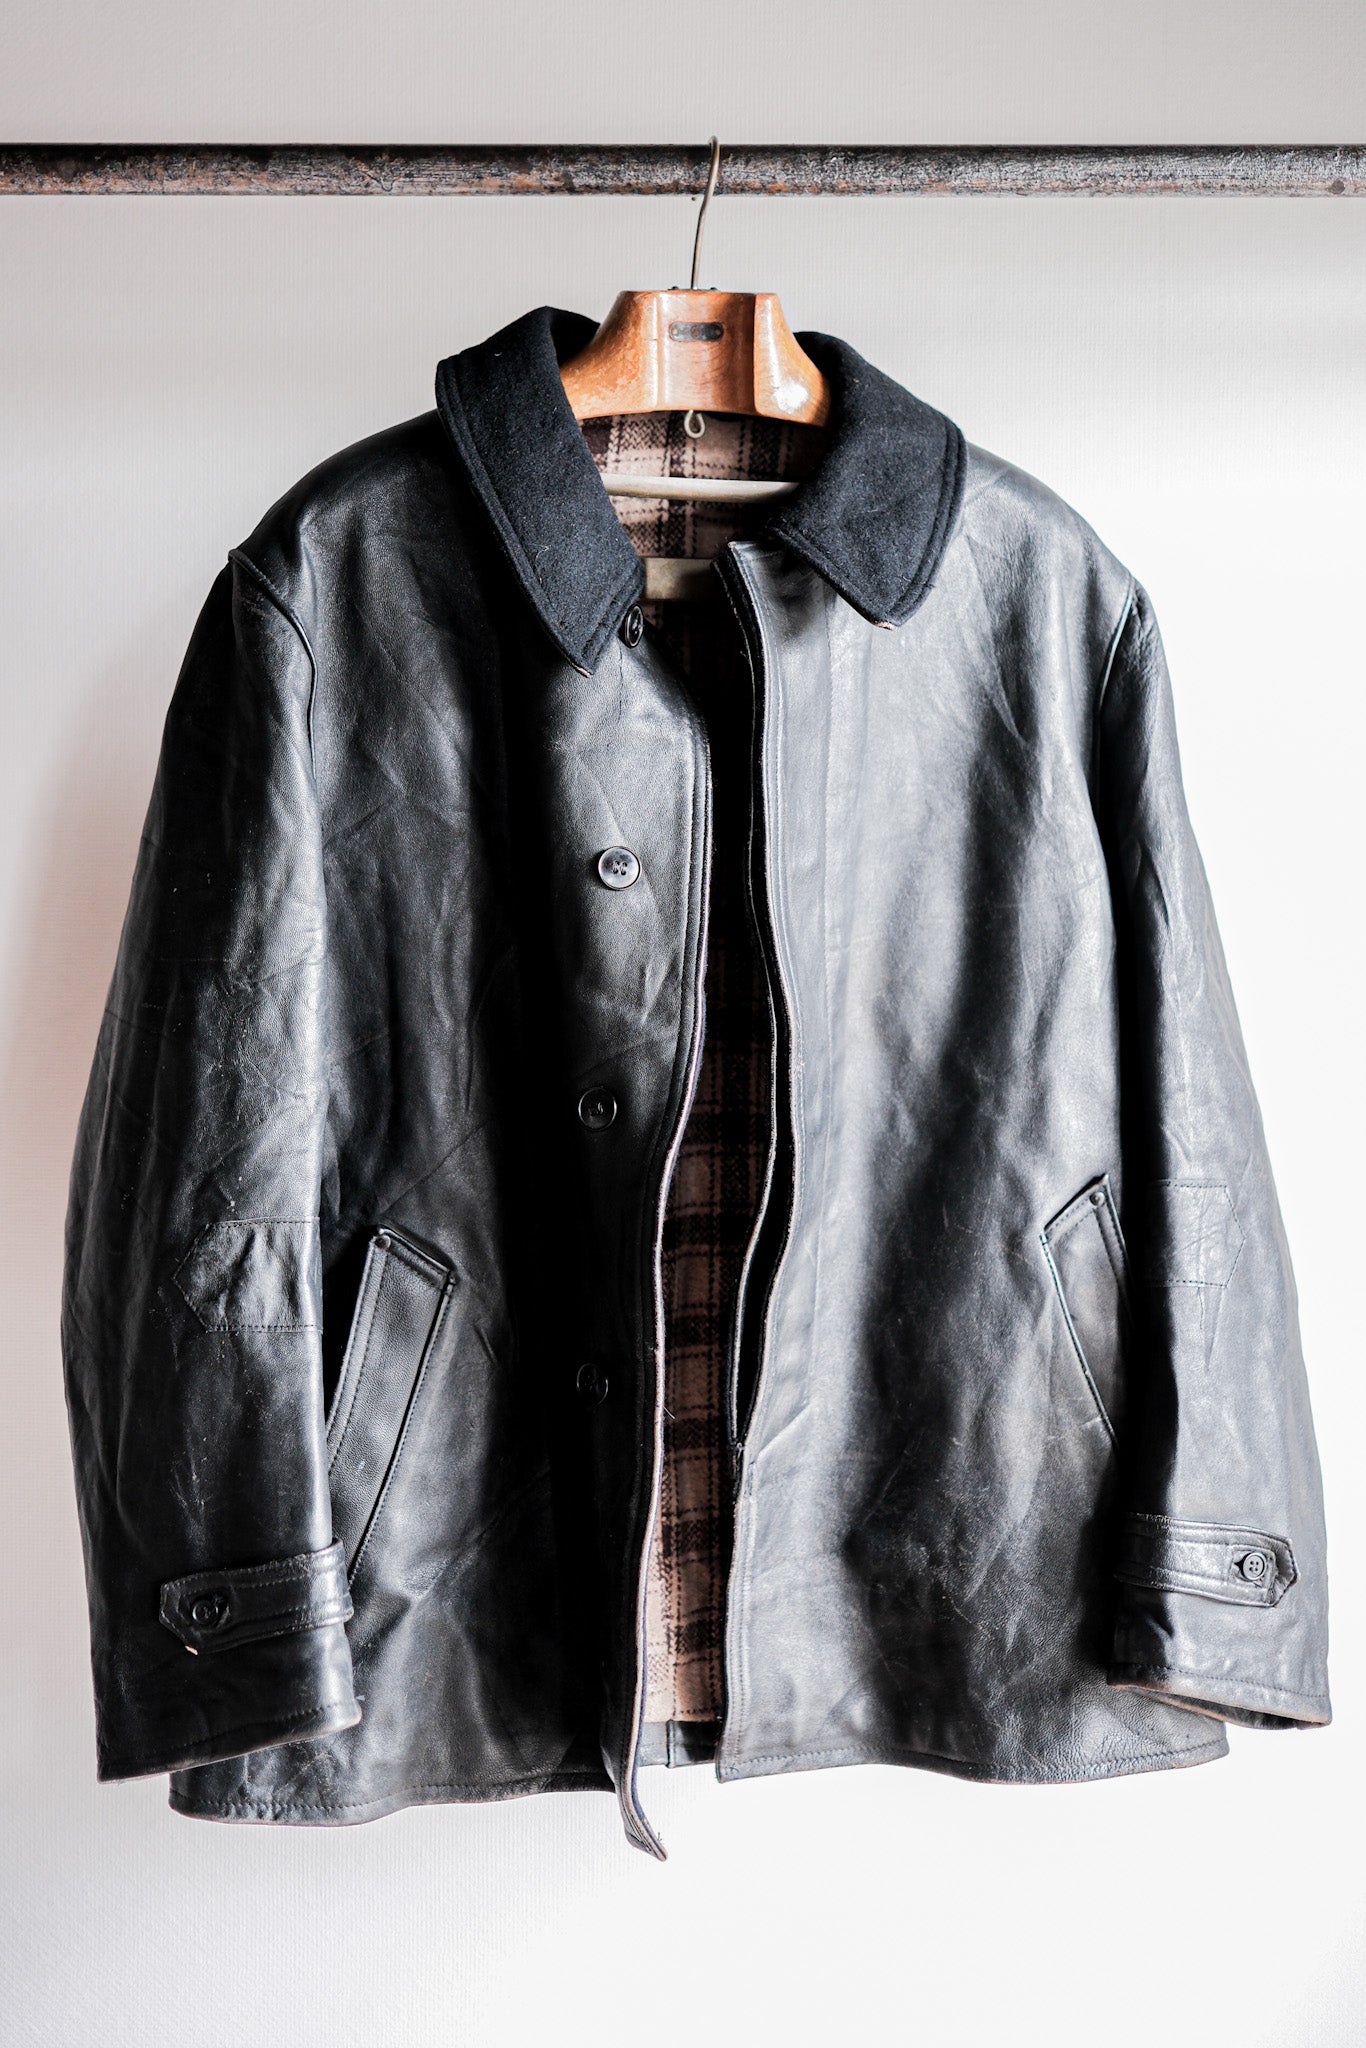 60's] French Vintage Black Leather Work Jacket Wool Collar